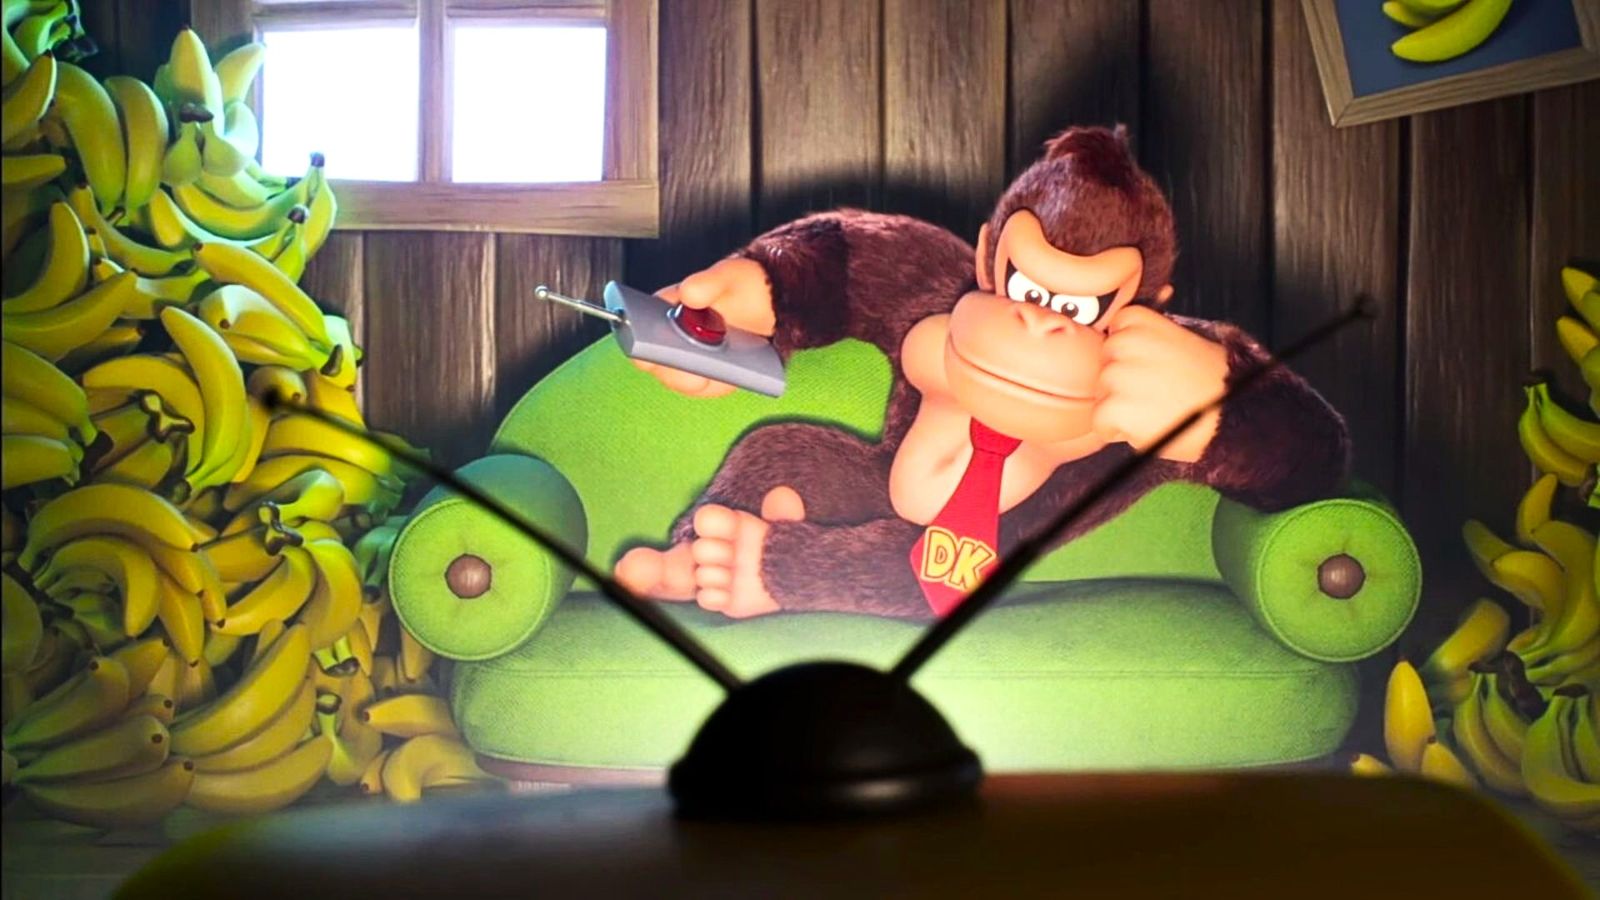 Donkey Kong watching tv surrounded by bananas